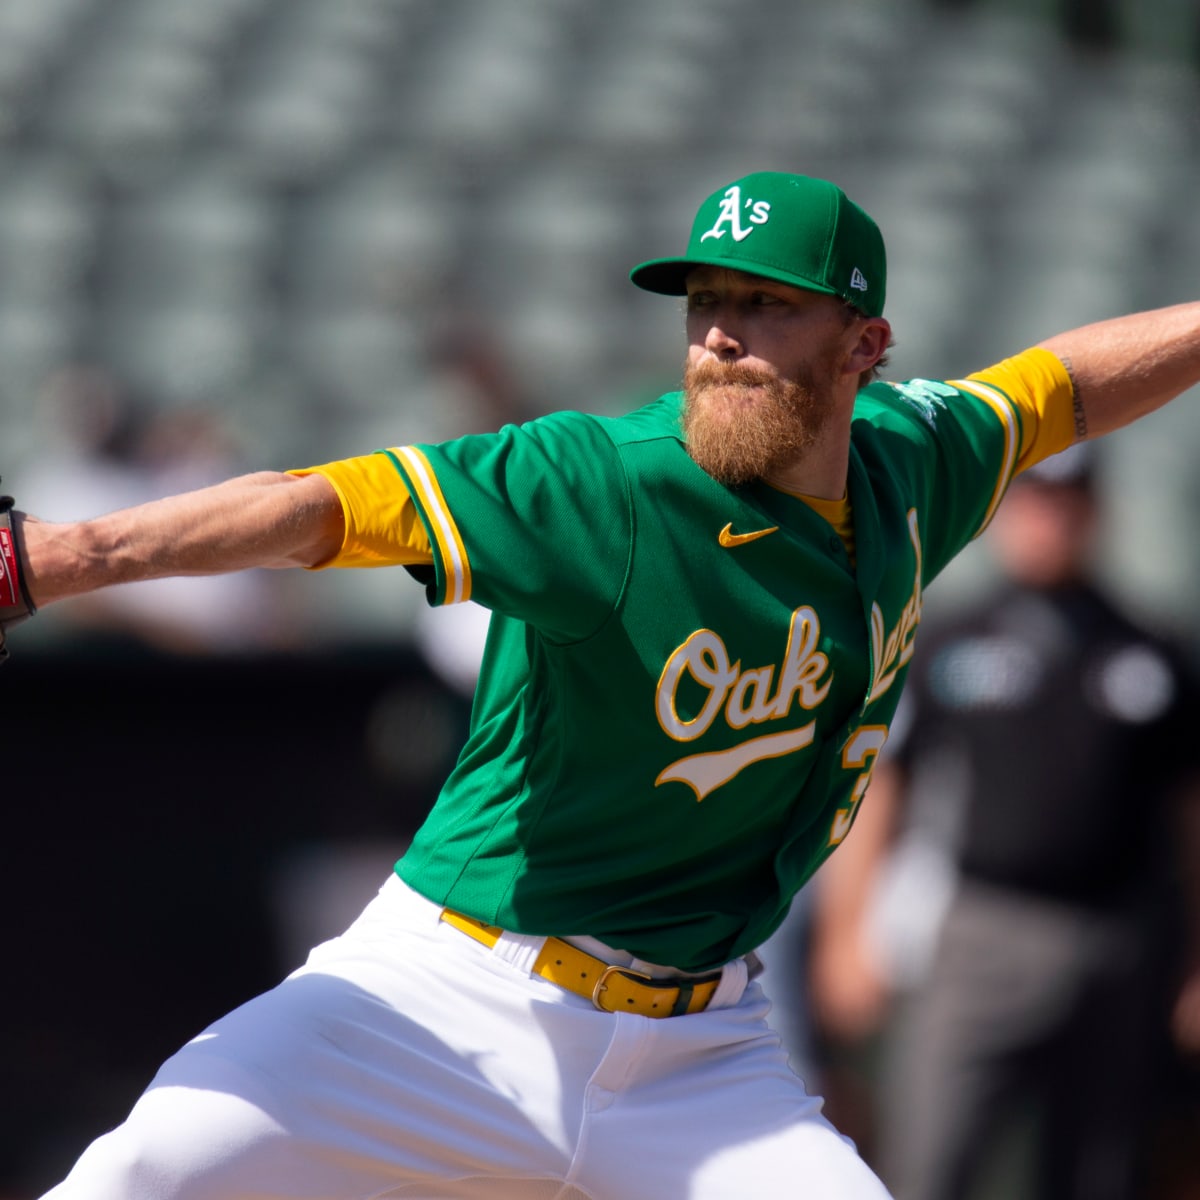 Jake Diekman - MLB Relief pitcher - News, Stats, Bio and more - The Athletic